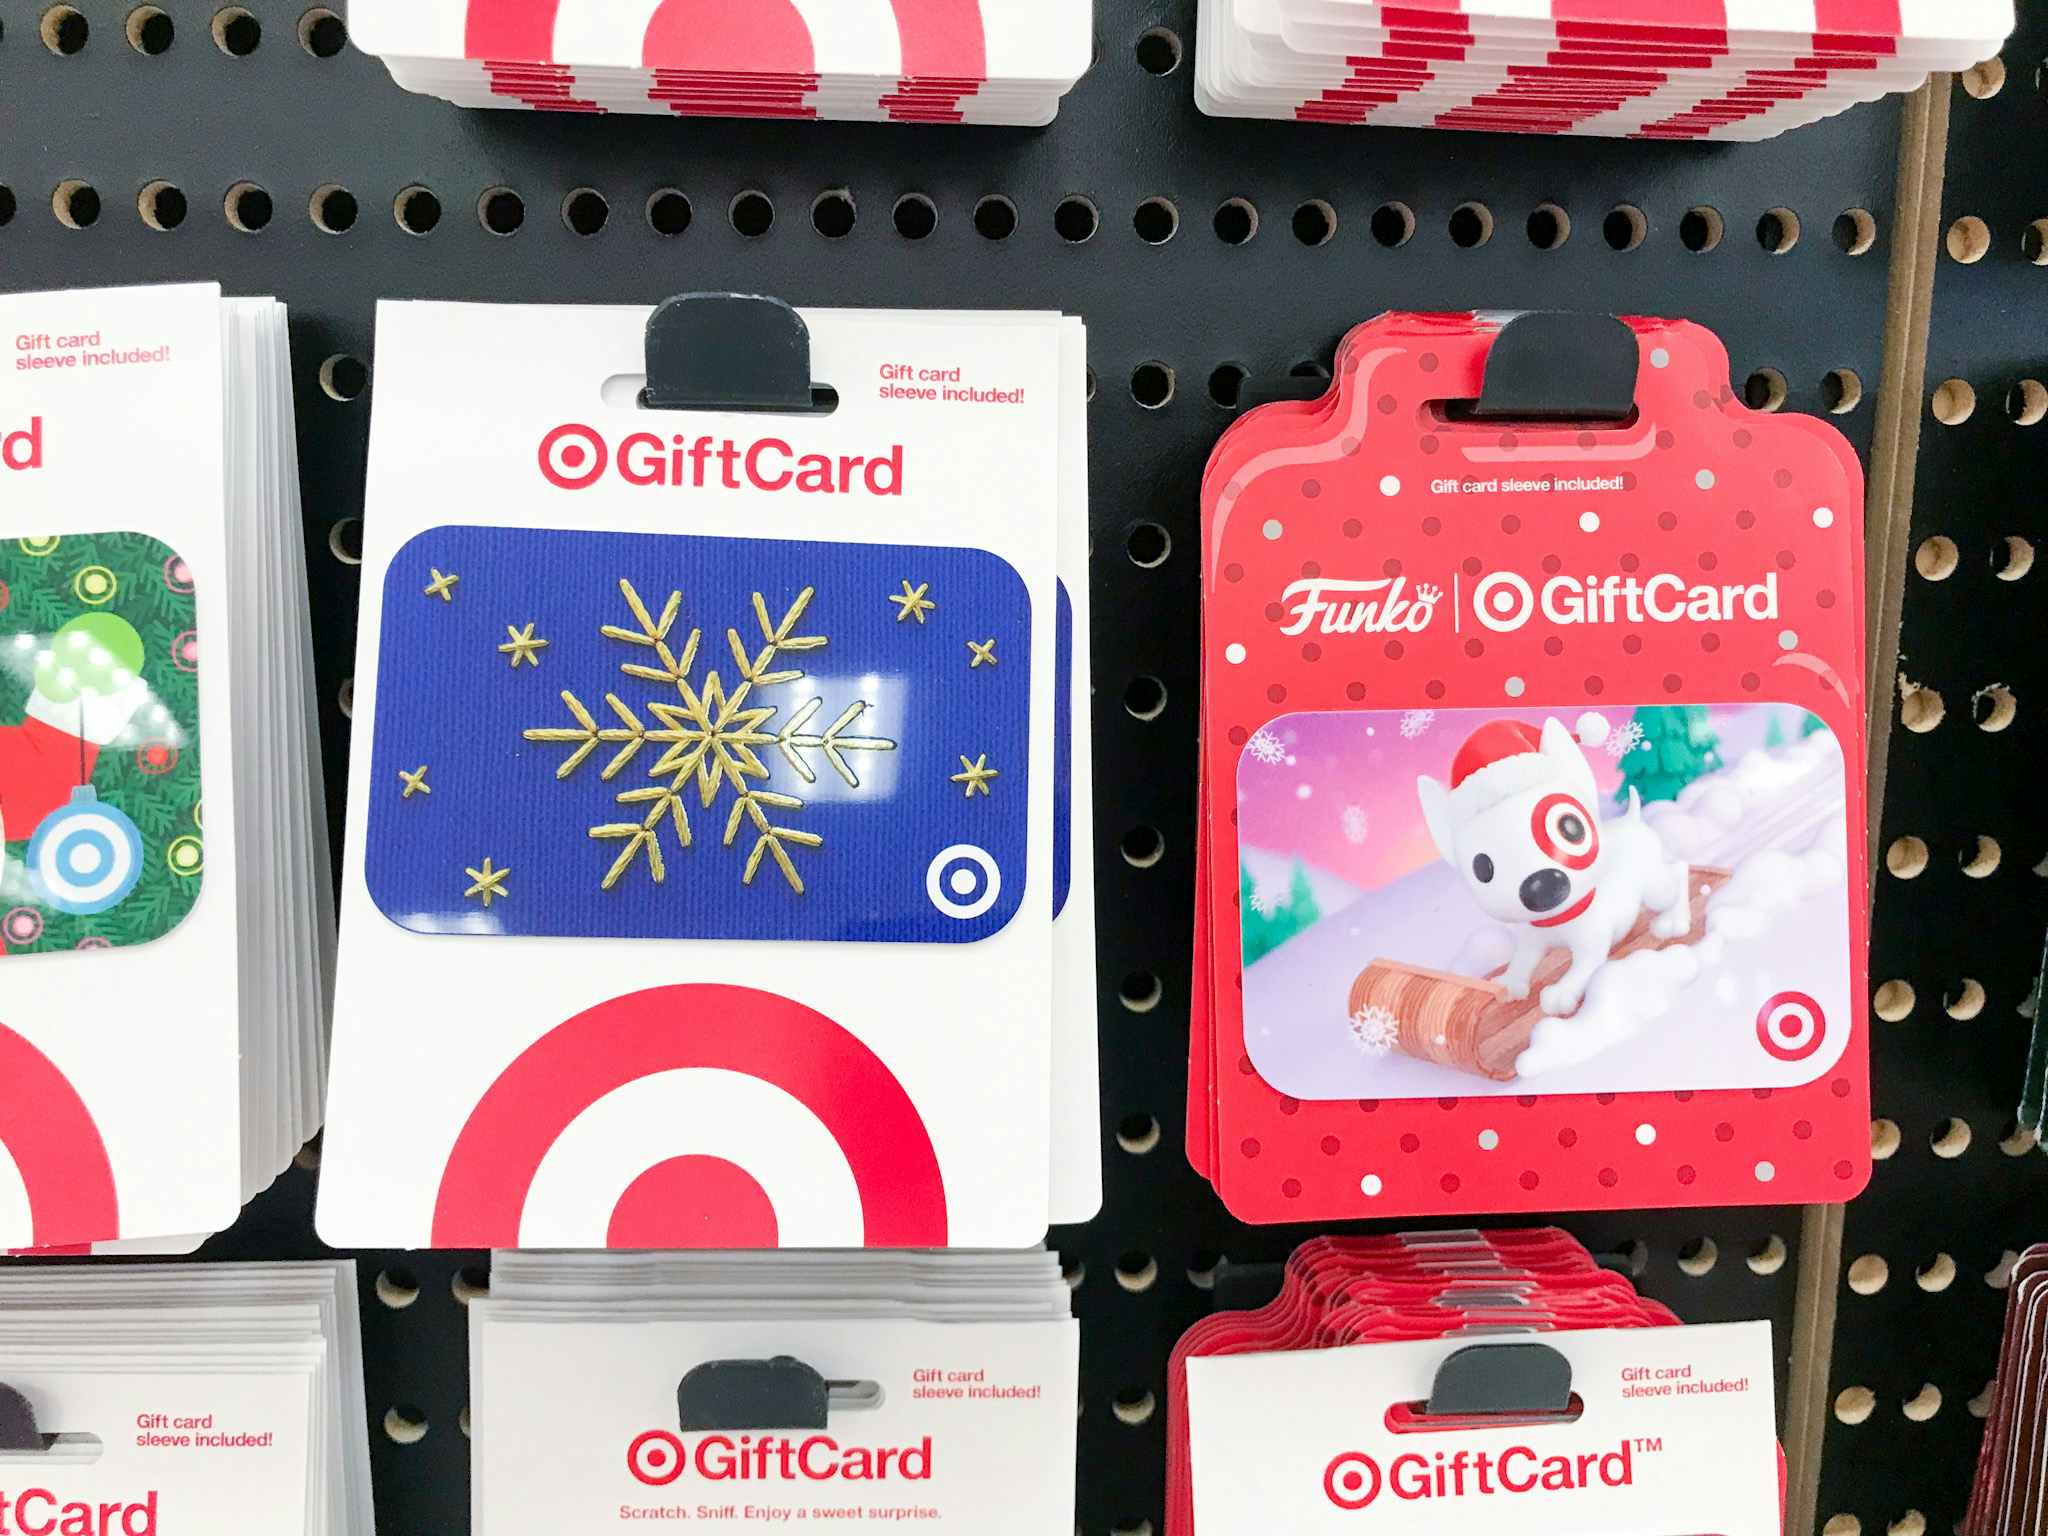 target gift cards on a display